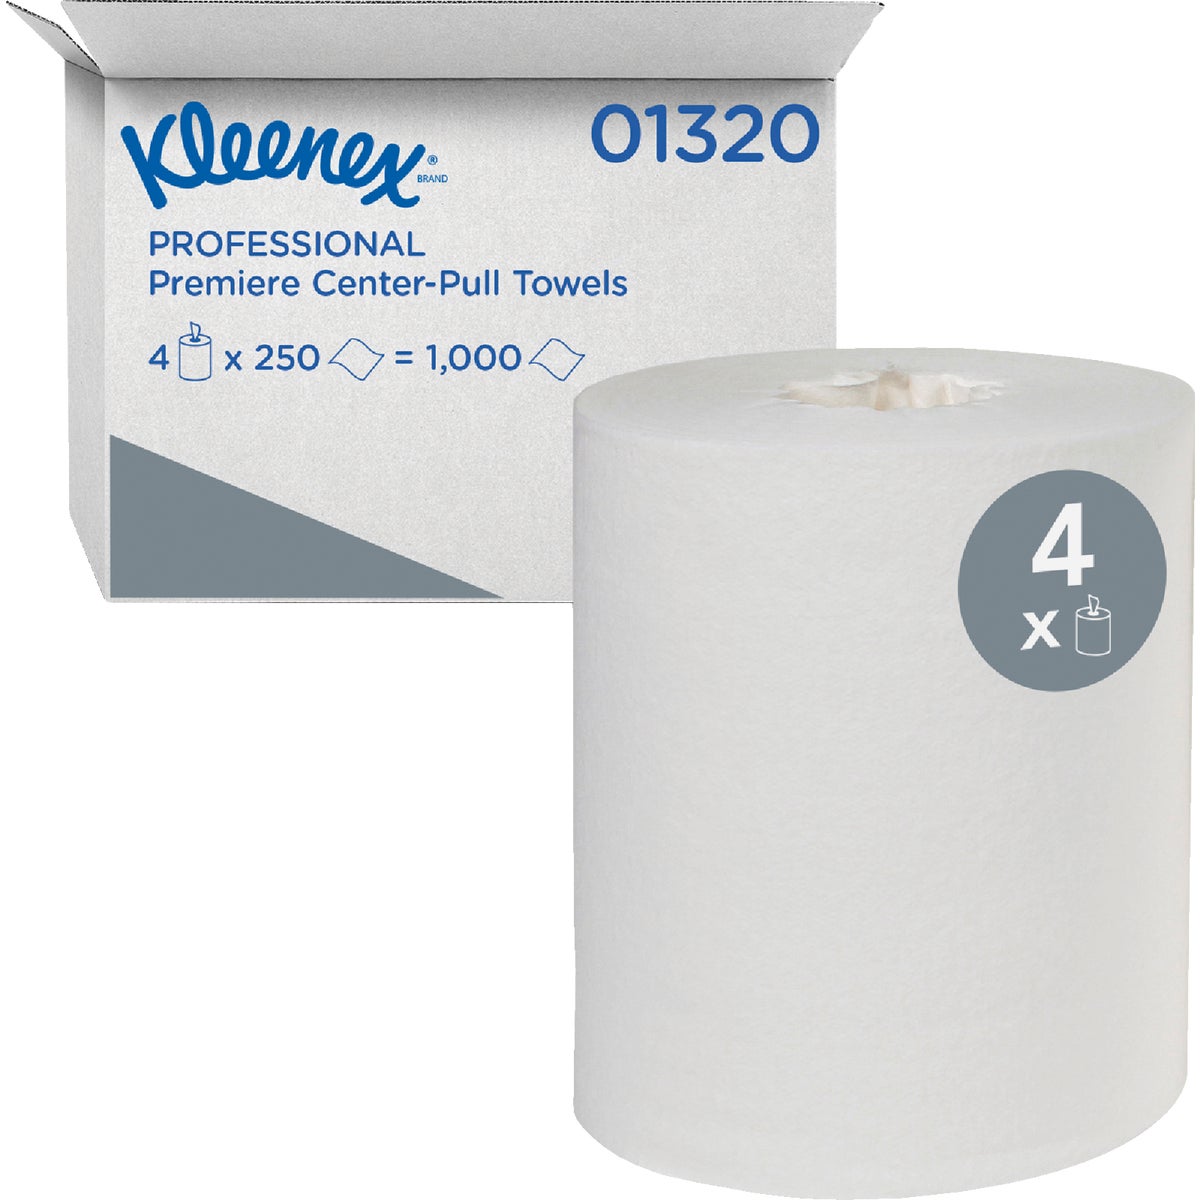 Kimberly Clark Kleenex Premiere Center-Pull Roll Towel (4-Count)